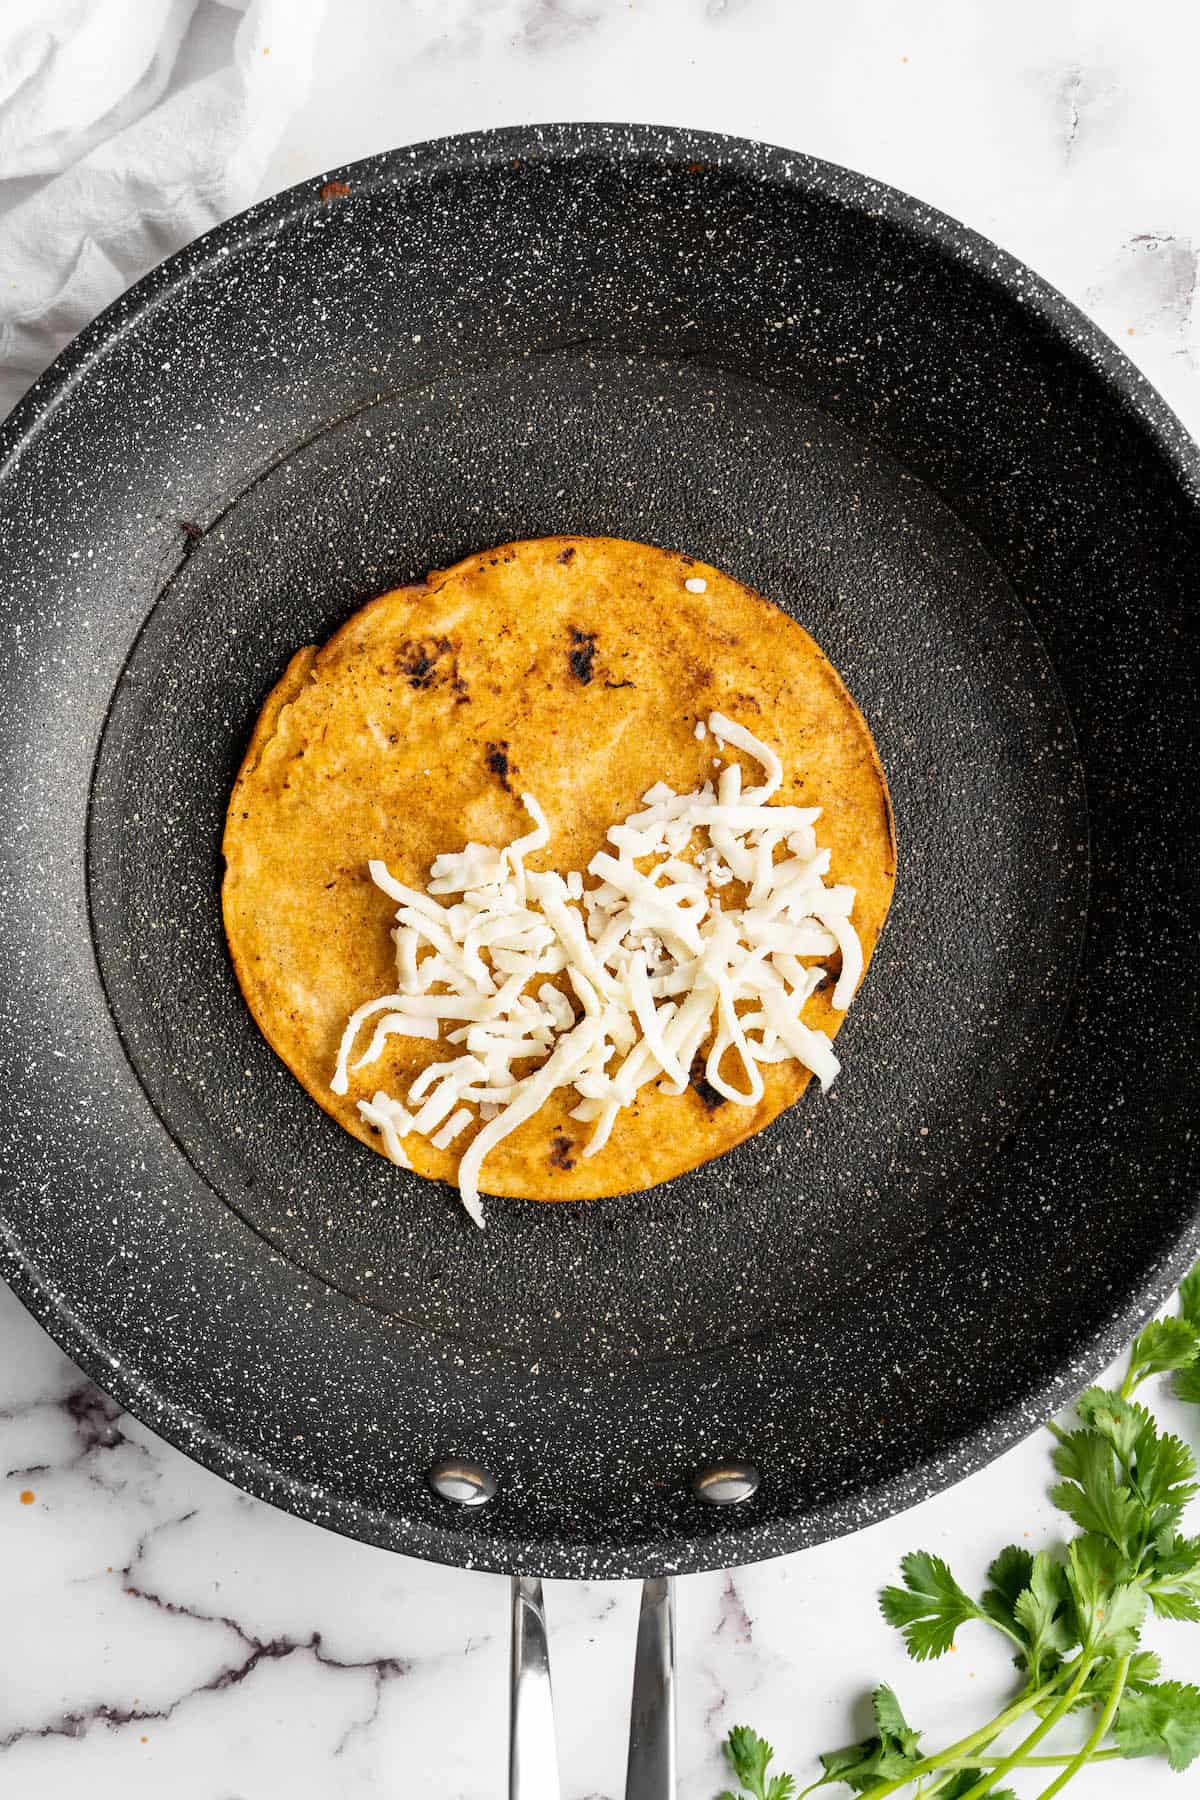 Overhead view of tortilla in skillet, topped with vegan cheese